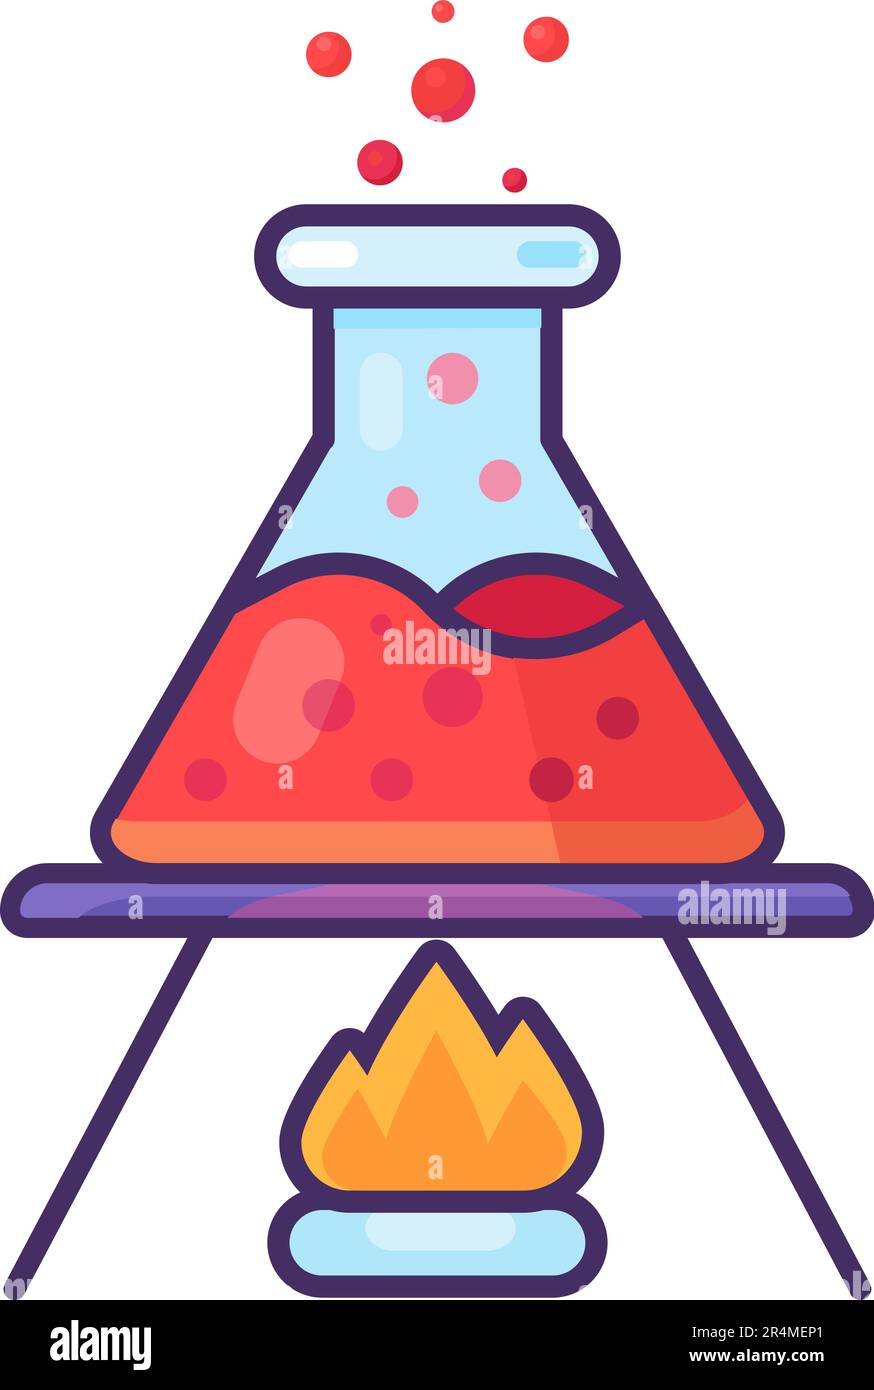 Chemical Flask with red boiling liquid inside on tripod over alcohol burner. Conducting experiments and analysis in chemistry. Simple cartoon outline Stock Vector